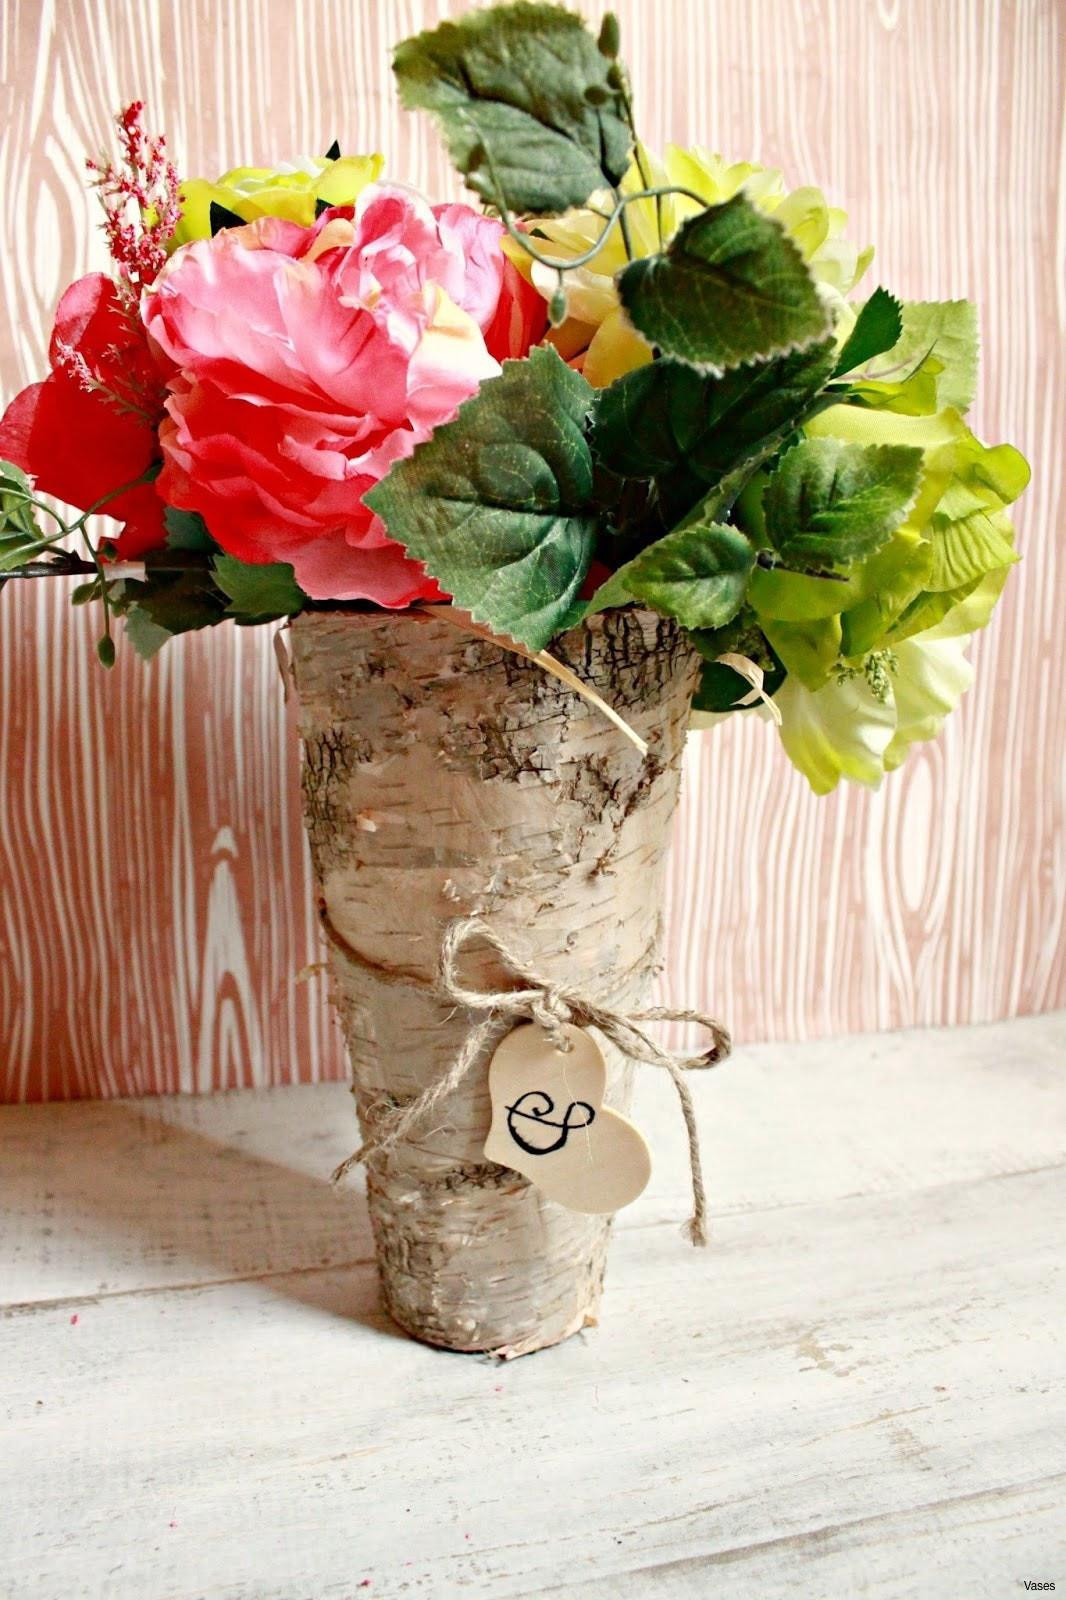 15 Popular Pedestal Vases Centerpieces 2024 free download pedestal vases centerpieces of diy wedding ideas on a budget fresh flowers and decorations for with regard to diy wedding ideas on a budget fresh flowers and decorations for weddings h vases